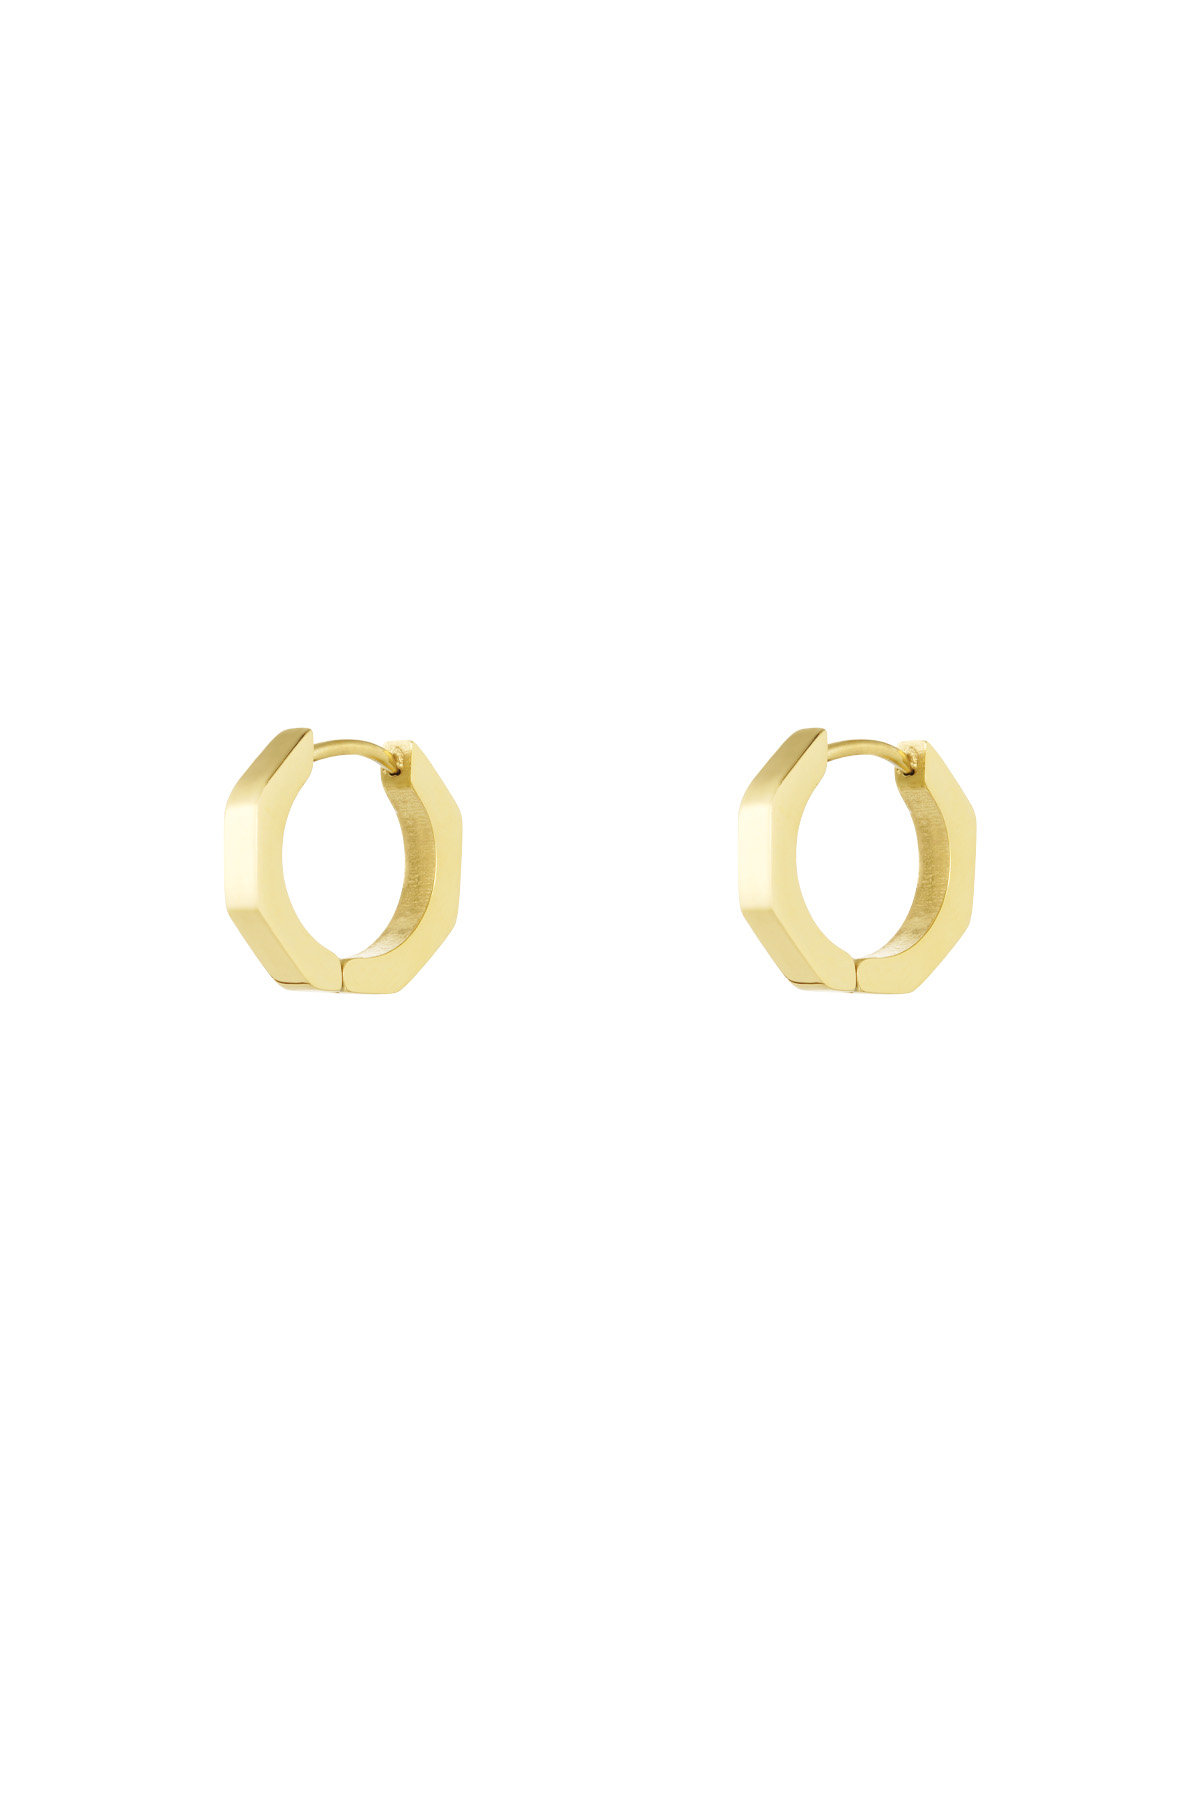 Classic round earrings small - gold  h5 